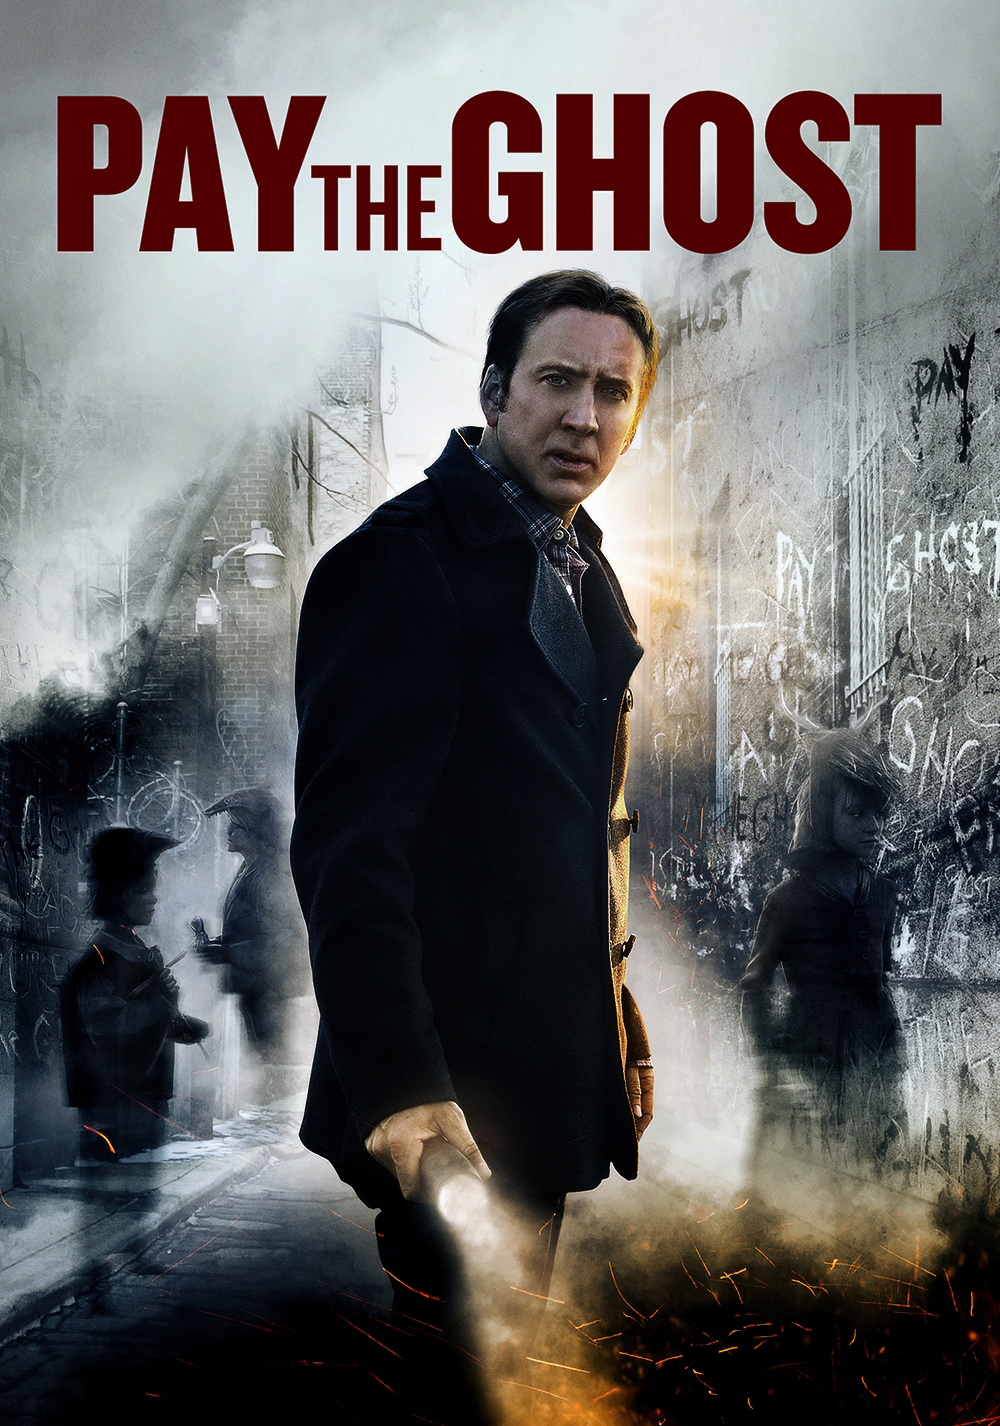 Pay The Ghost Backgrounds, Compatible - PC, Mobile, Gadgets| 1000x1426 px